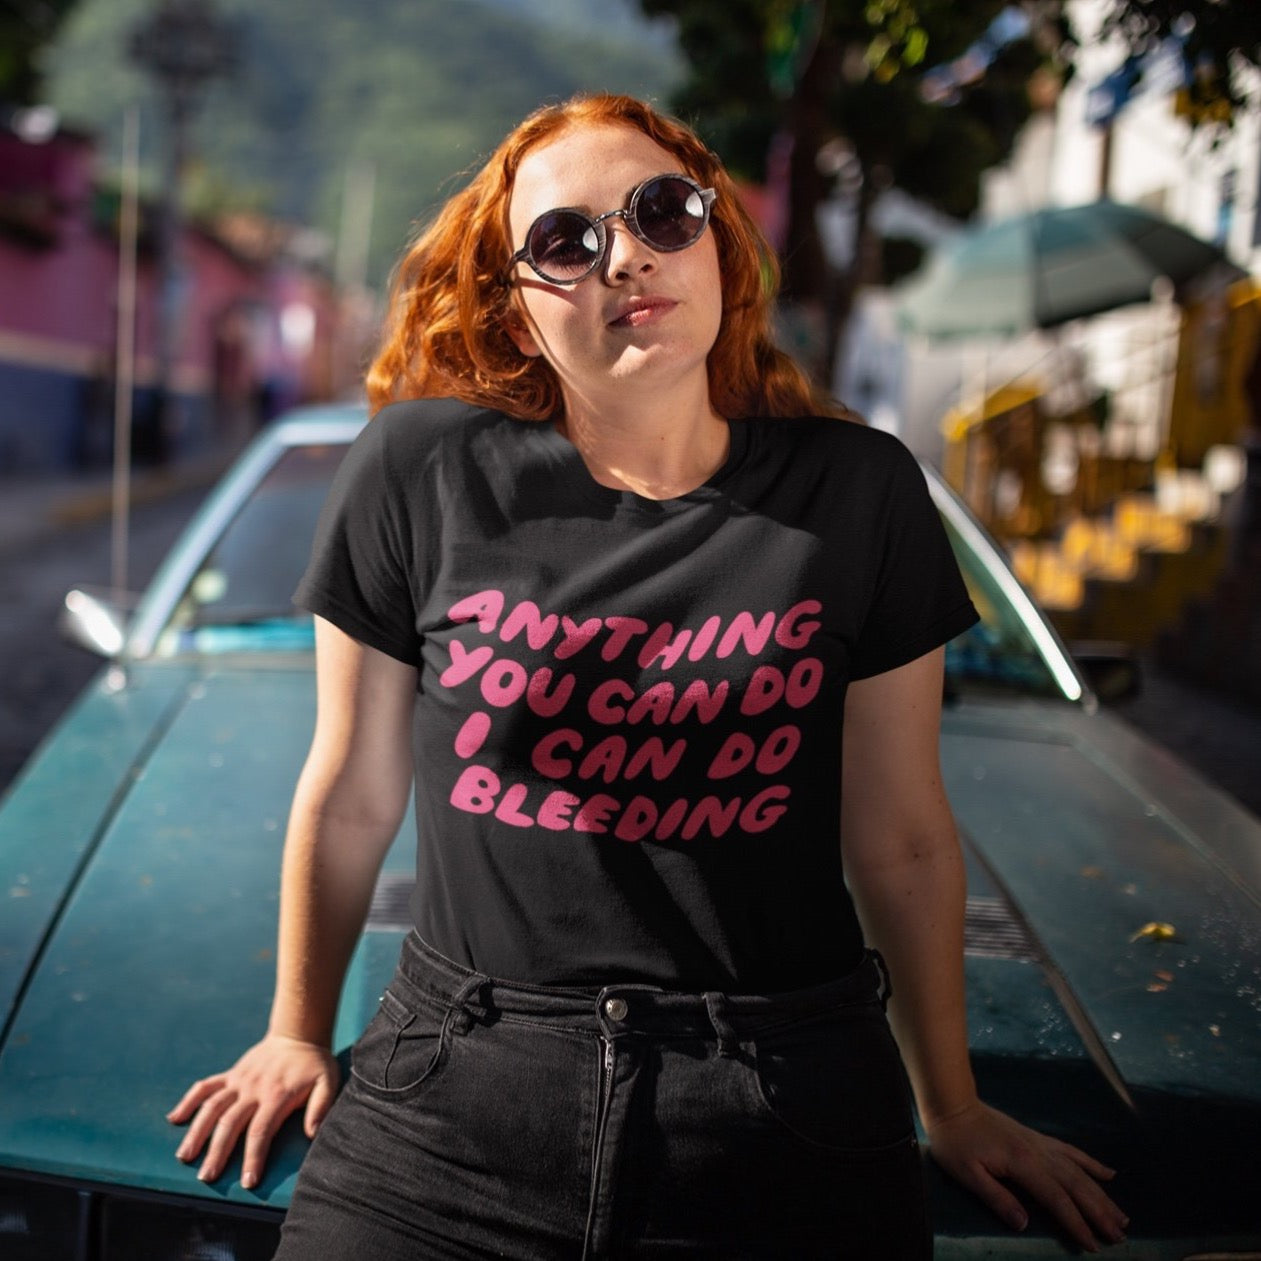 Anything You Can Do I Can Do Bleeding Short-Sleeve Unisex Feminist T shirt - Feminist Trash Store - Shop Women’s Rights T-shirts 